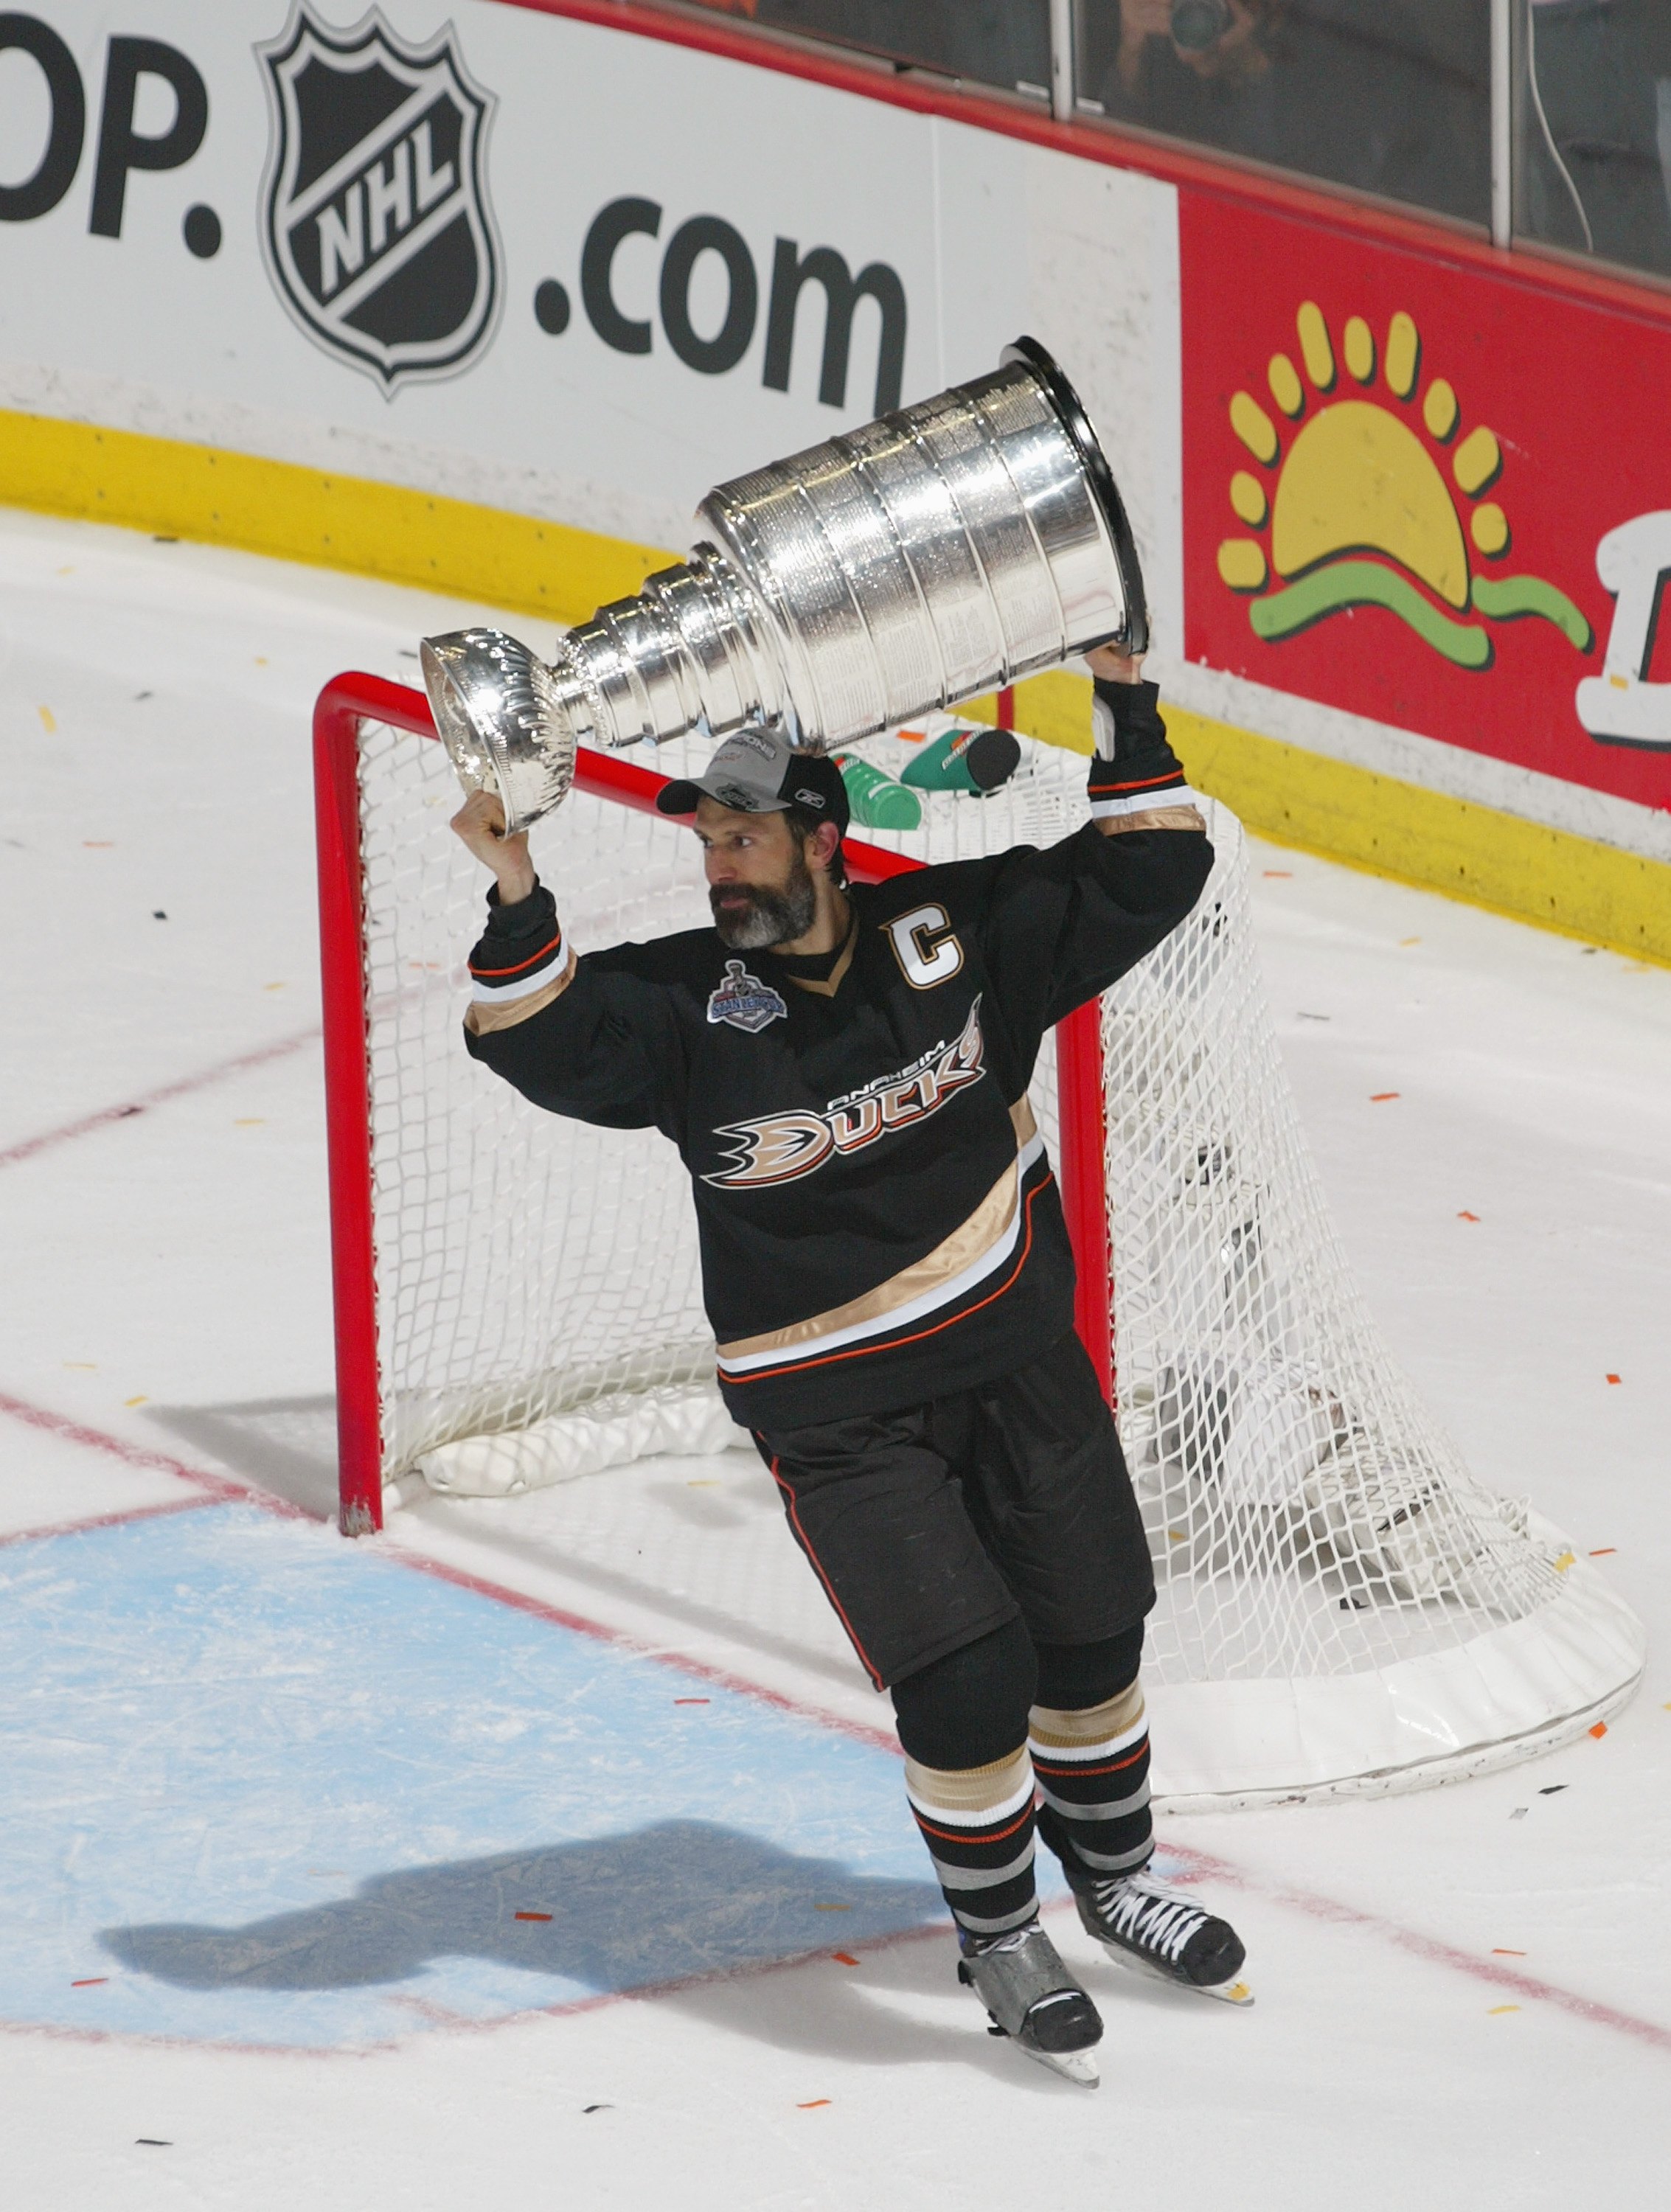 ANAHEIM, CA - JUNE 06:  Scott Niedermayer #27 of the Anaheim Ducks hoists the Stanley Cup after his team's victory over the Ottawa Senators during Game Five on June 6, 2007 at Honda Center in Anaheim, California. The Ducks defeated the Senators 6-2 to win